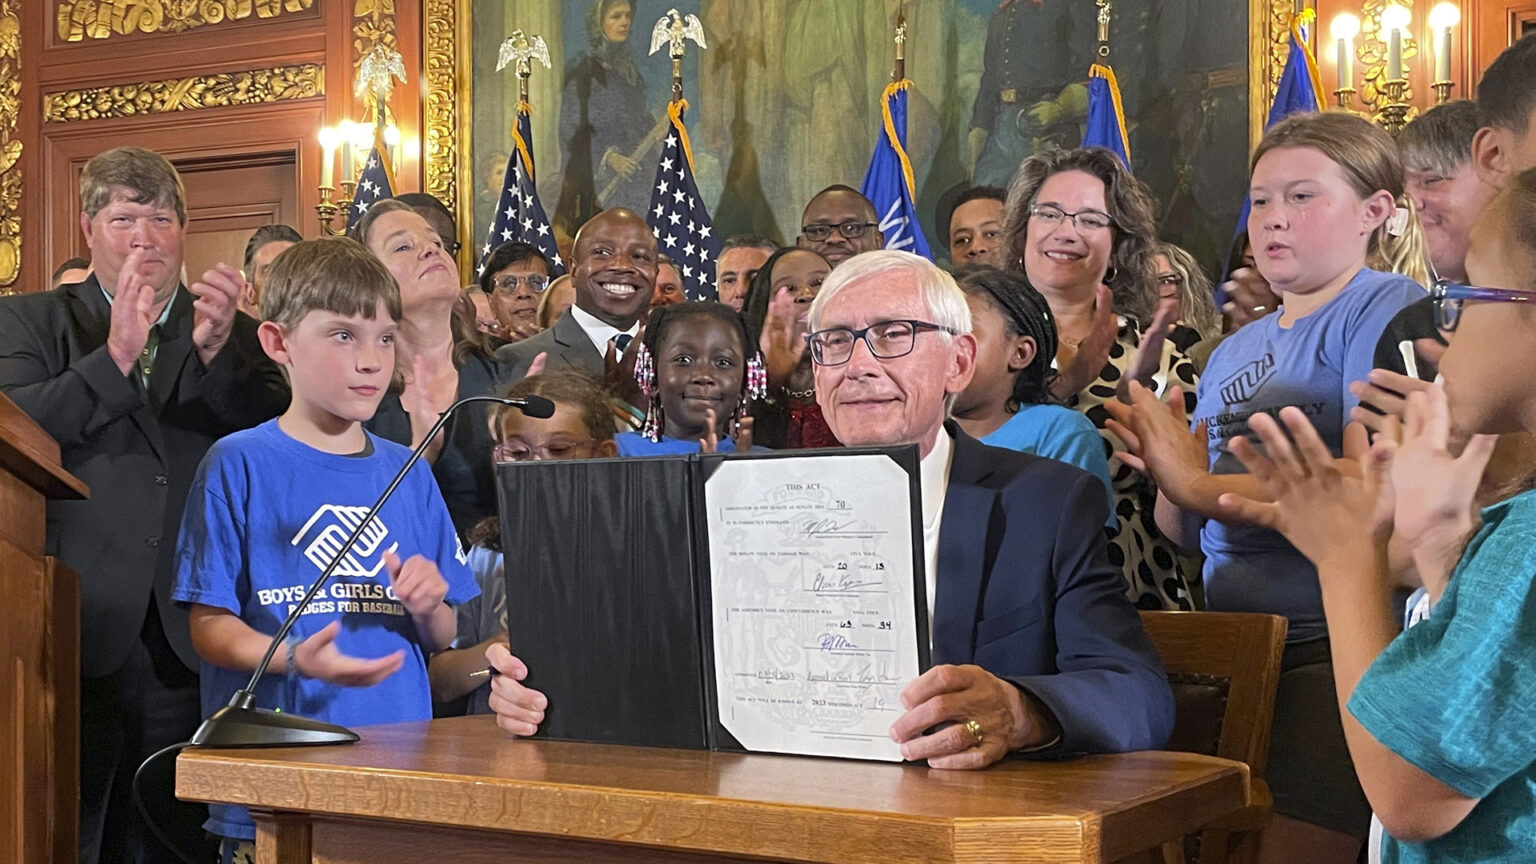 Tony Evers sits at a small wood table and displays a series of signatures in a document inside an open folder, with children and adults applauding while standing beside and behind him in a room with a row of U.S. and Wisconsin flags, electric wall sconces, paintings, and filigree gilded wall decorations.